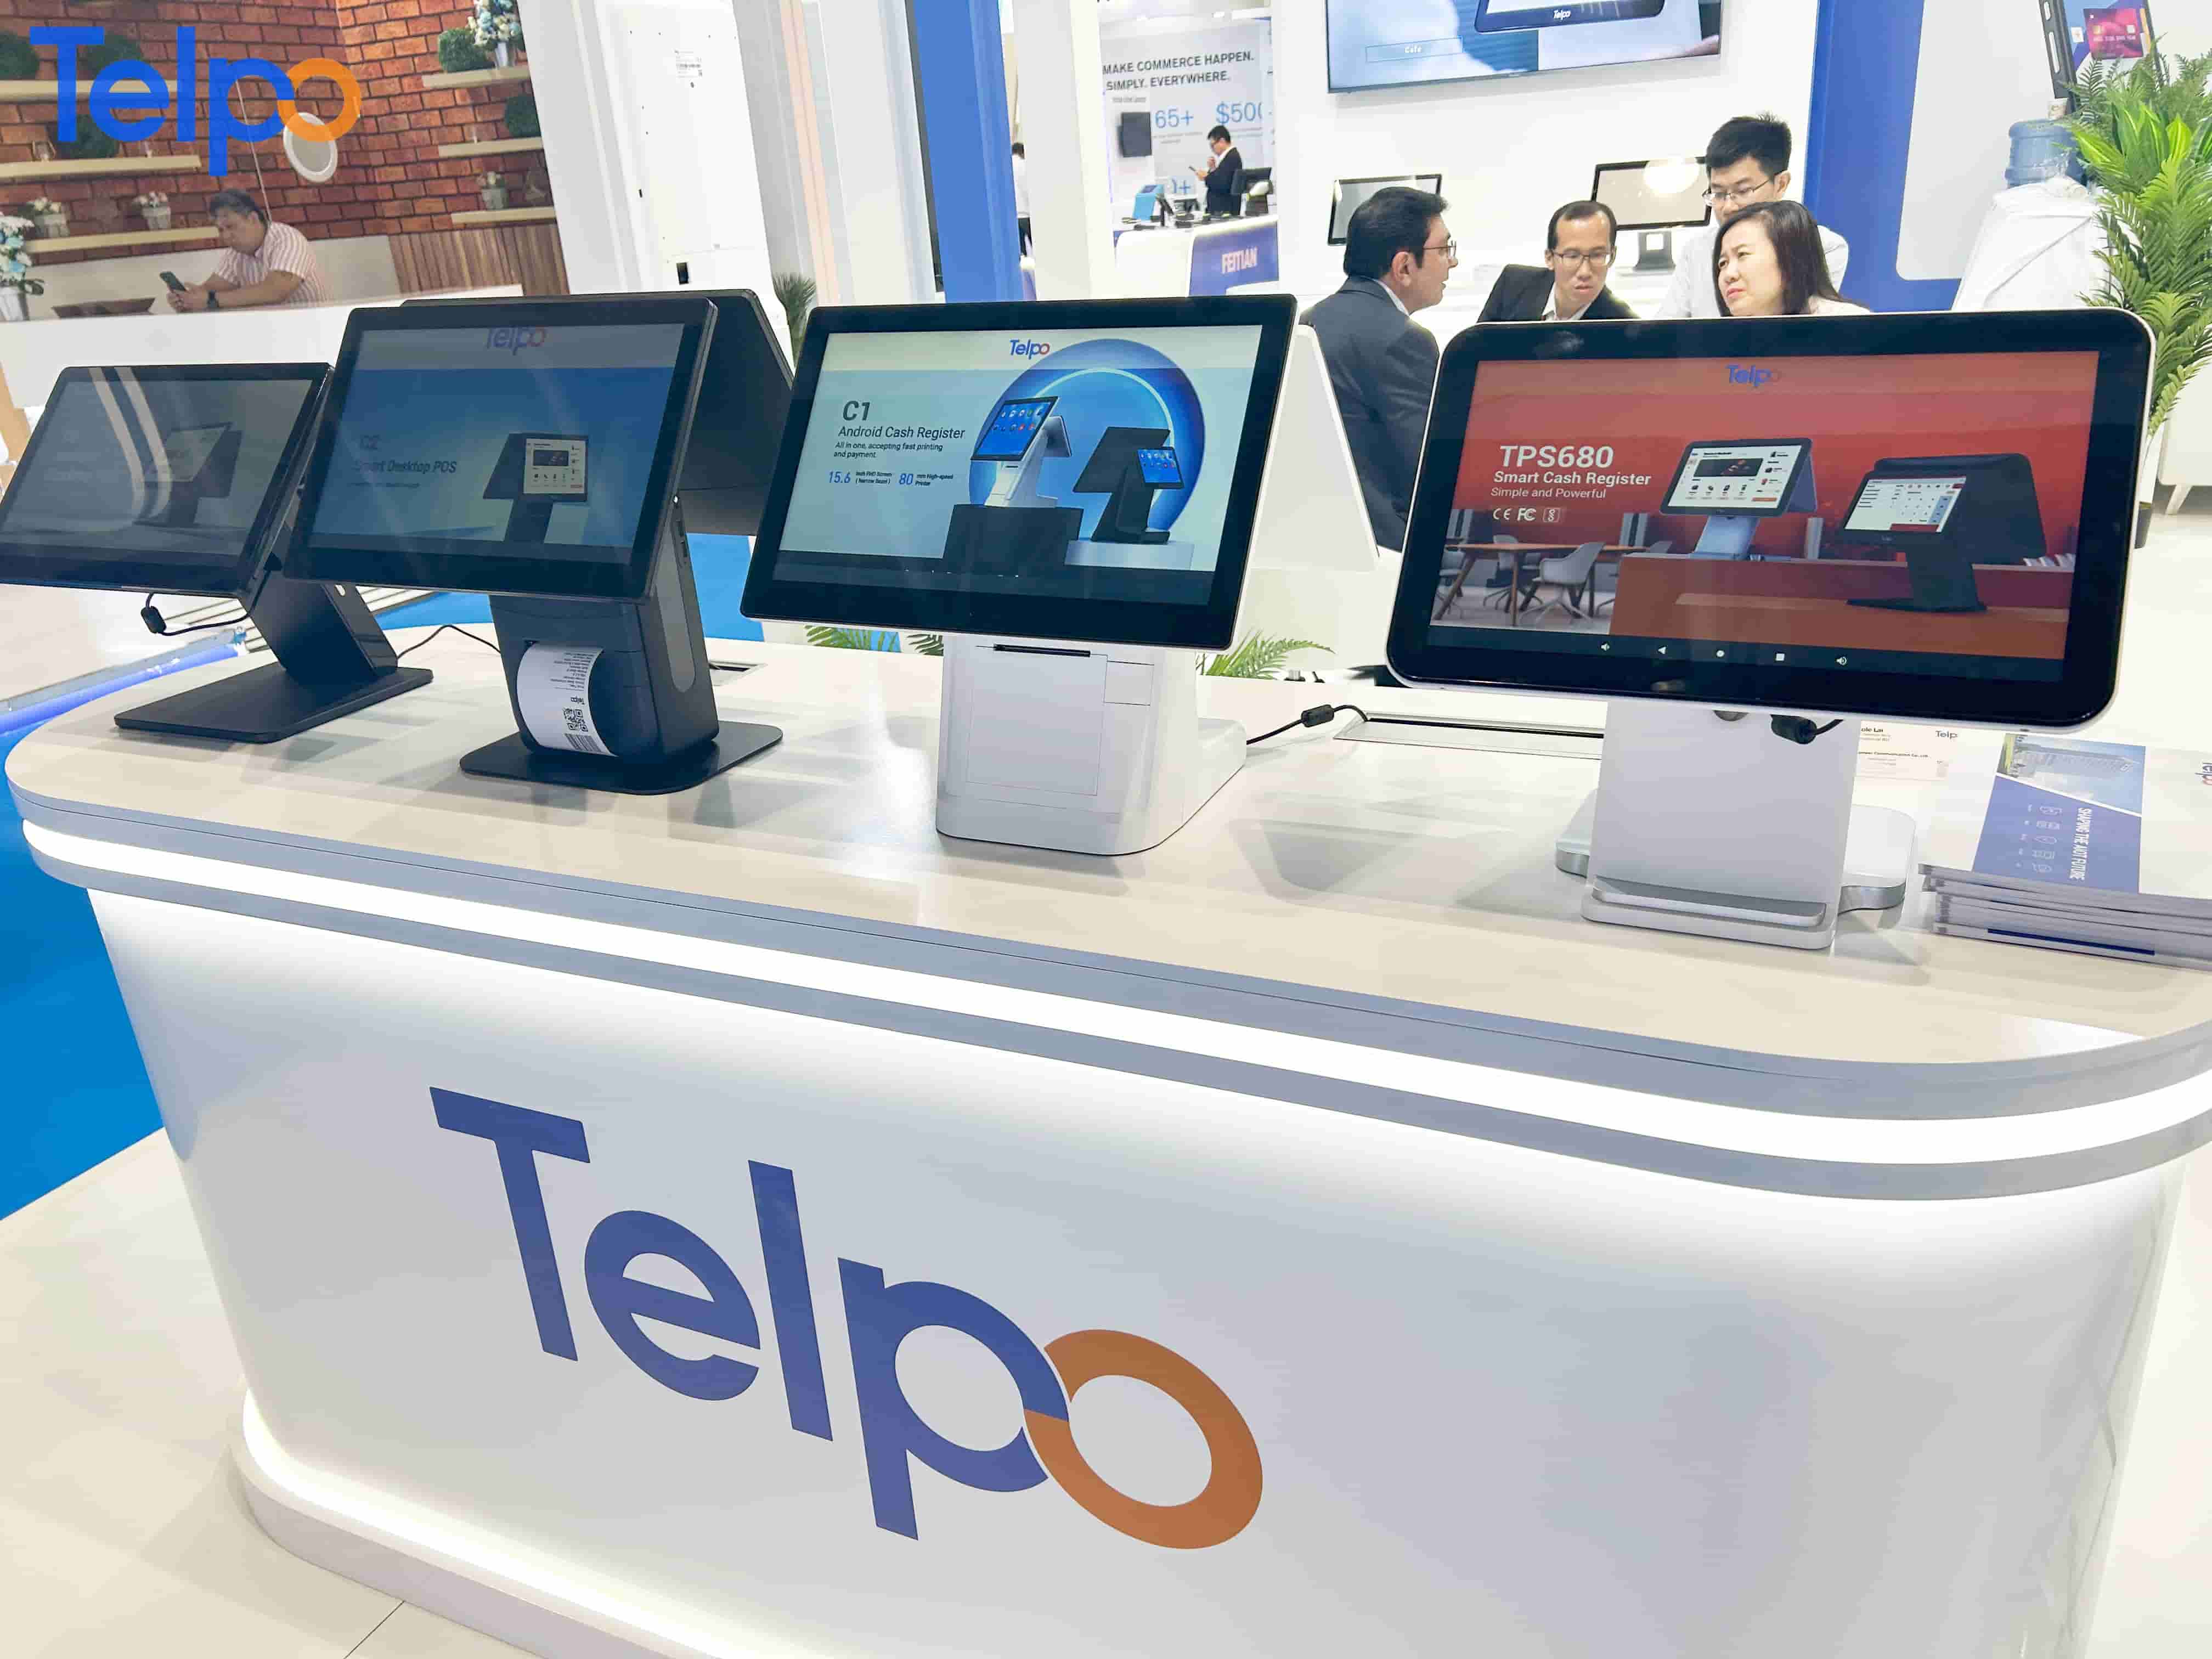 The Telpo smart cash register series at the exhibition